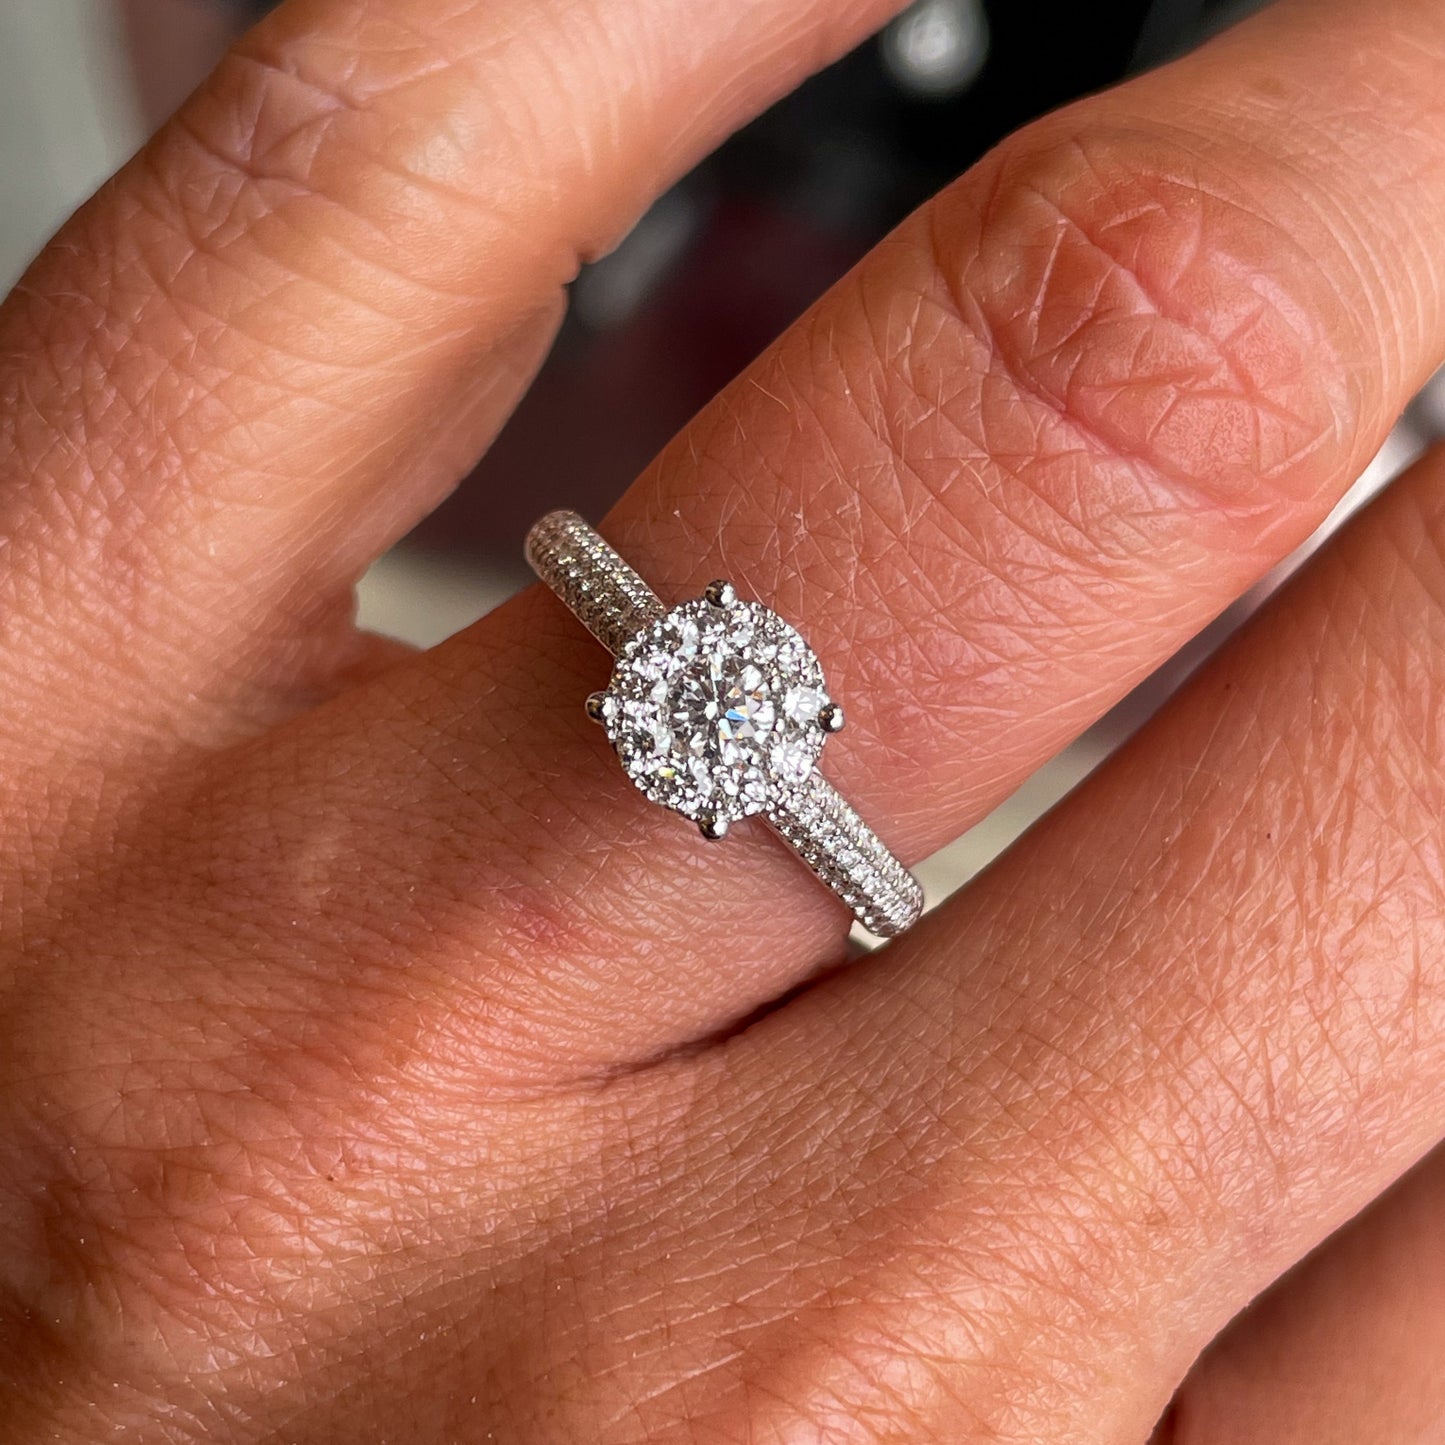 This round cluster diamond engagement ring  is a complete classic.  Its simplicity is so romantic.  The Details...  One 18ct white gold diamond engagement ring.  Diamond halo cluster in a round shape with pavé diamond-set shoulders. 0.74ct in total of diamonds.  Colour G.  Clarity VS.  Centre stone: 0.26ct  Melée: 0.48ct  18ct white gold.  Size N